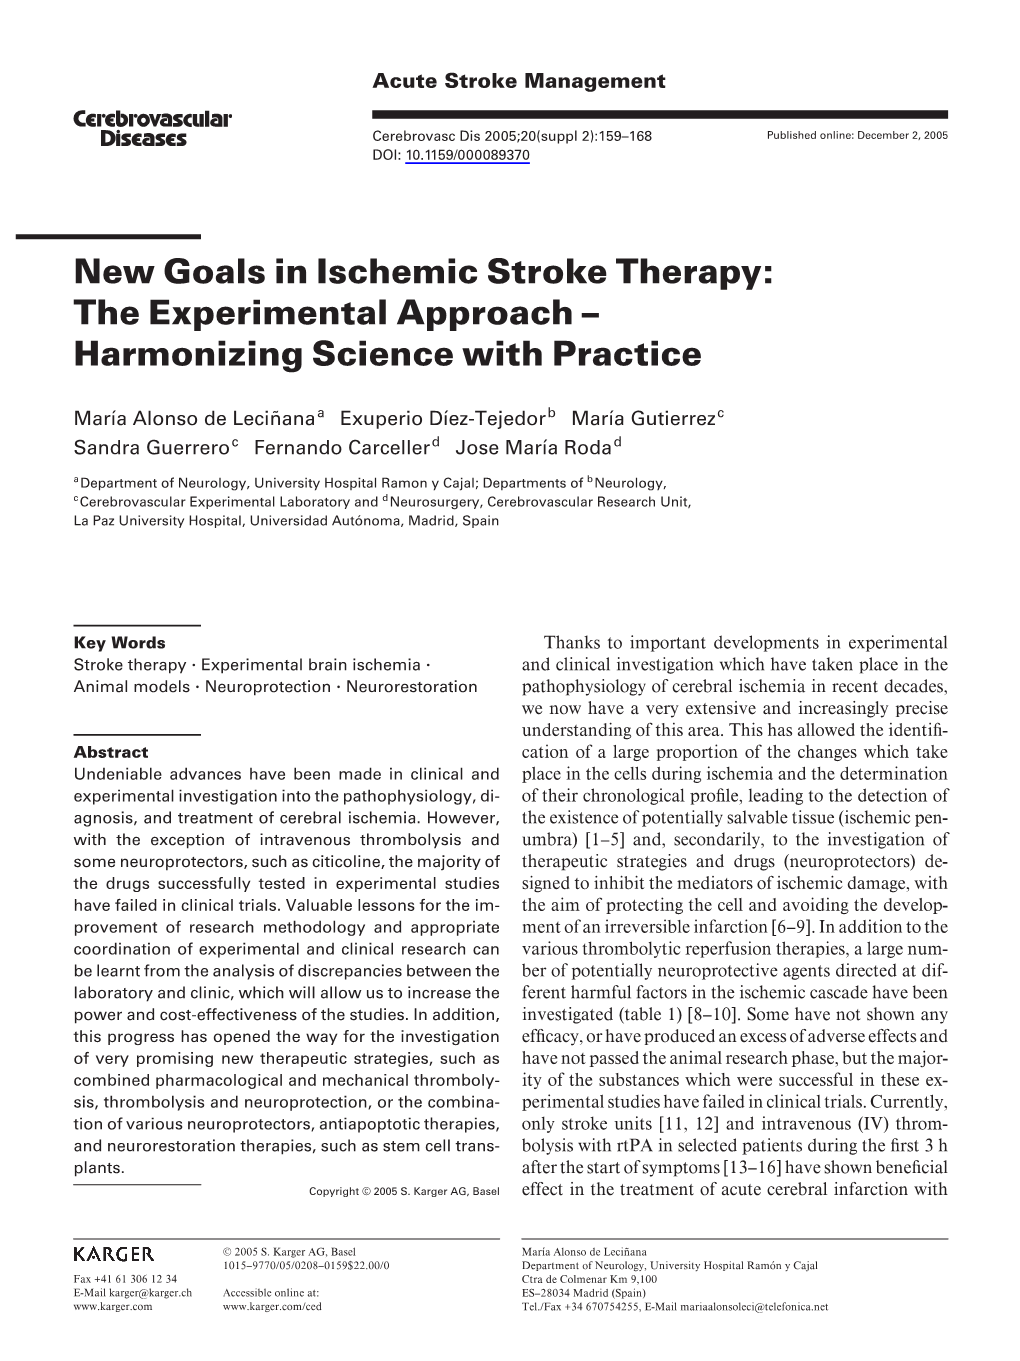 New Goals in Ischemic Stroke Therapy: the Experimental Approach – Harmonizing Science with Practice